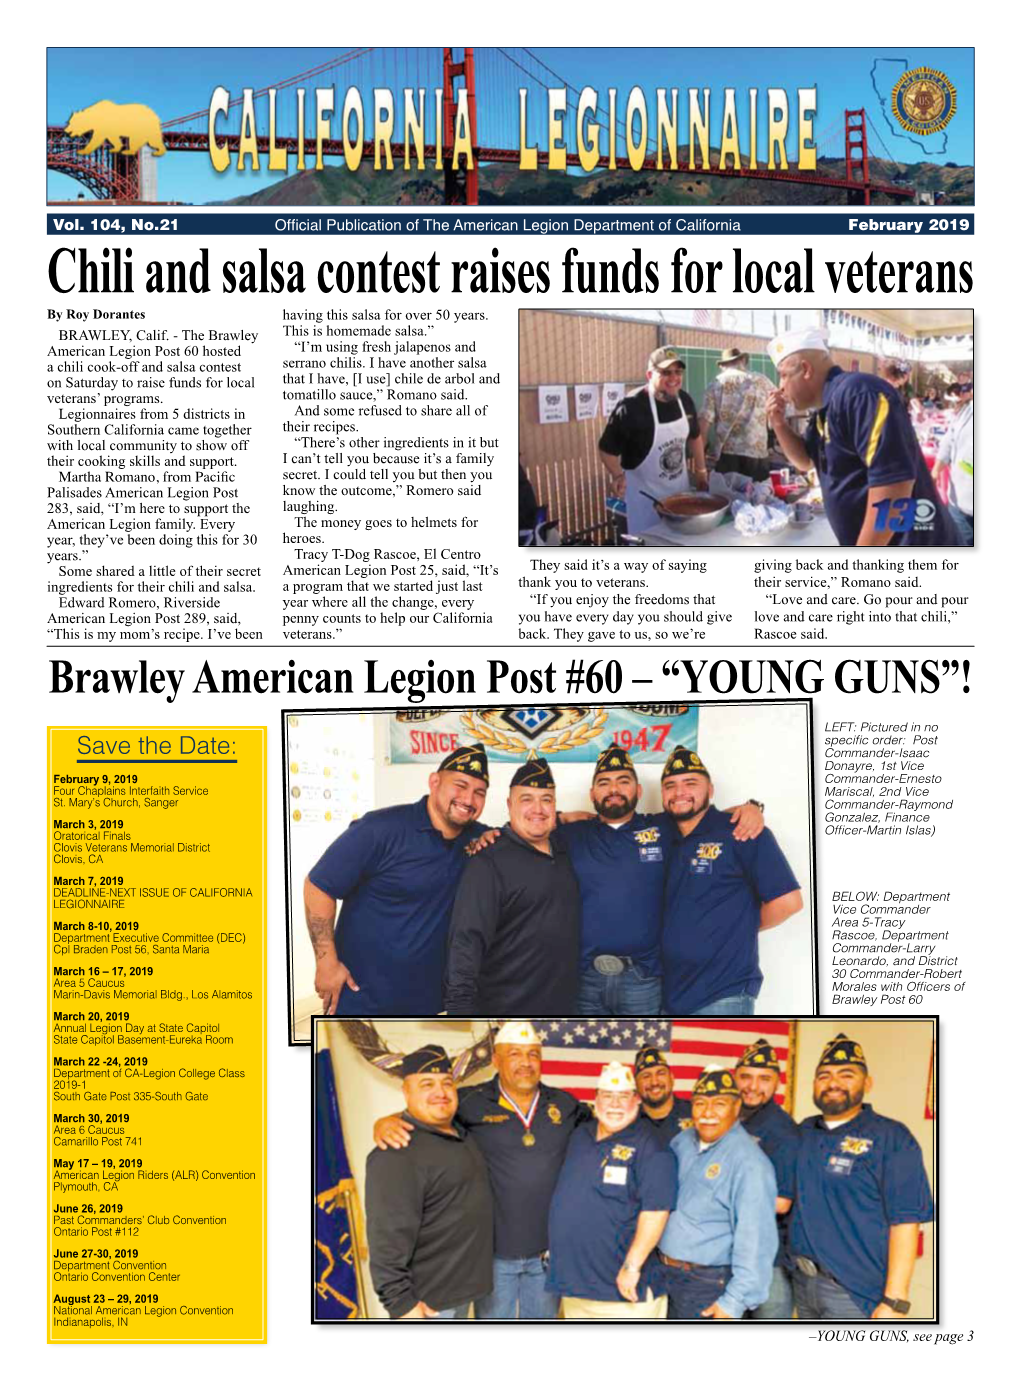 Chili and Salsa Contest Raises Funds for Local Veterans by Roy Dorantes Having This Salsa for Over 50 Years